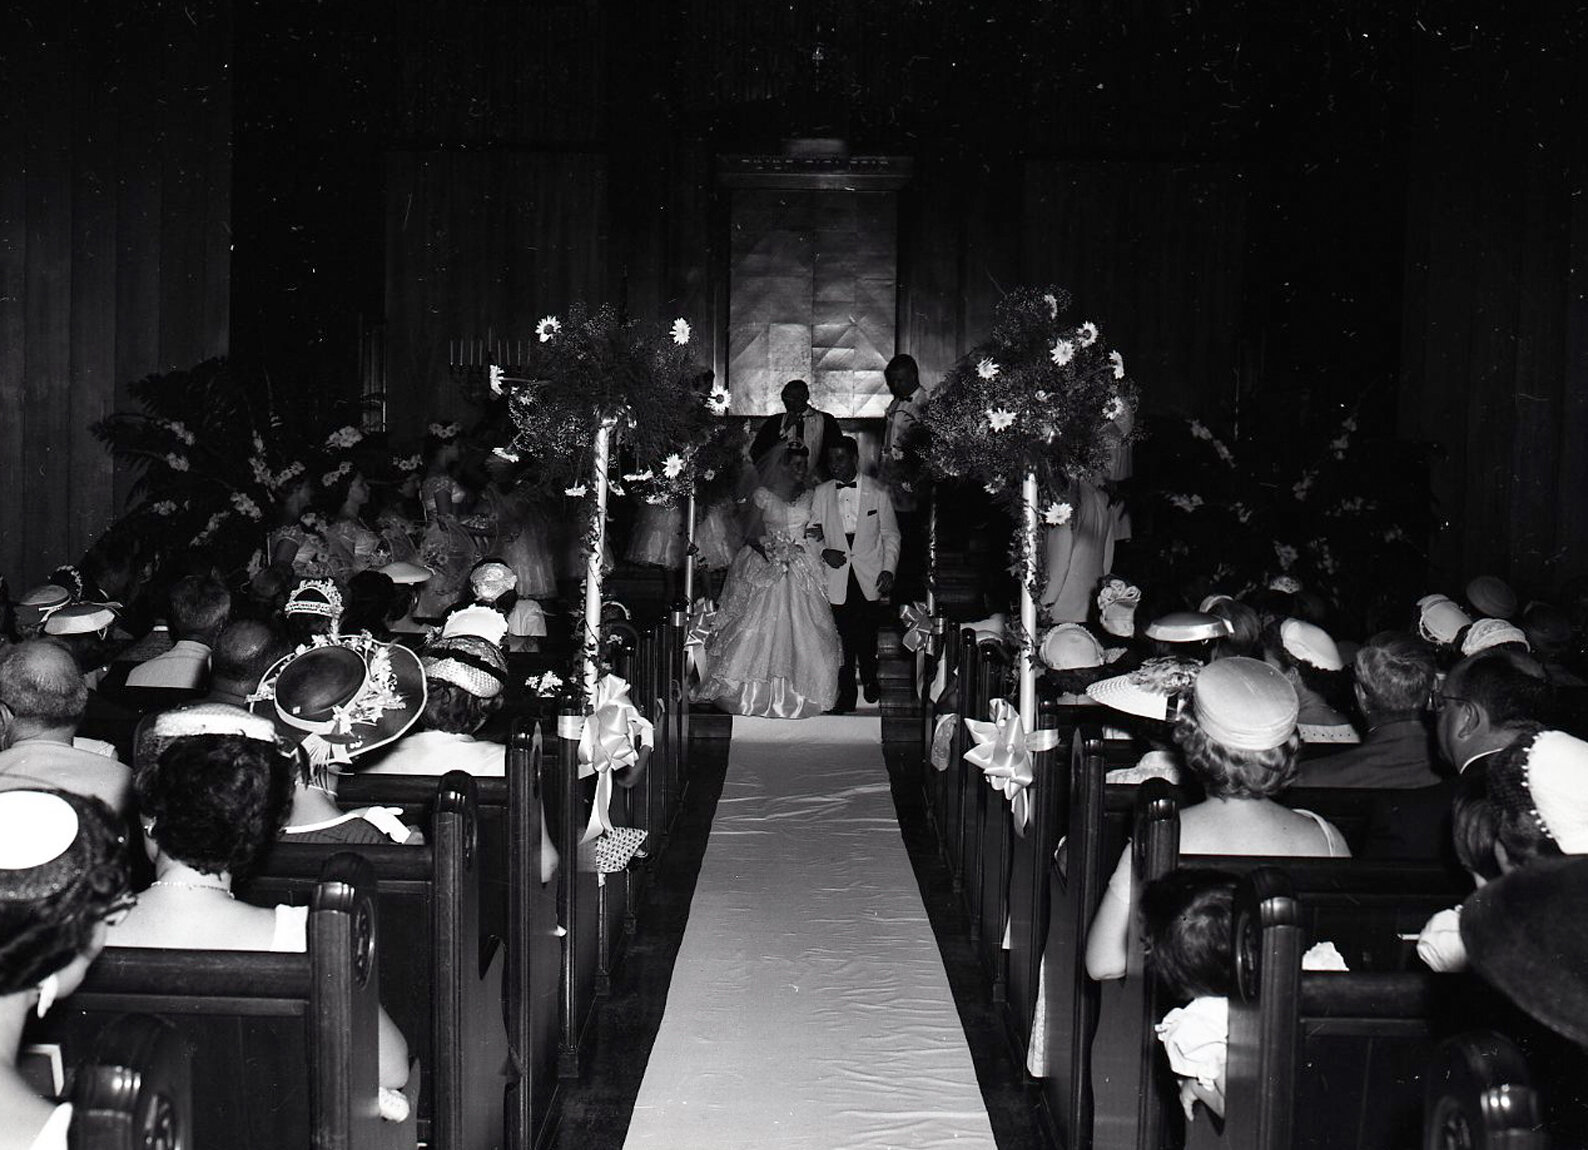 Wedding services at Temple Beth Israel 1956